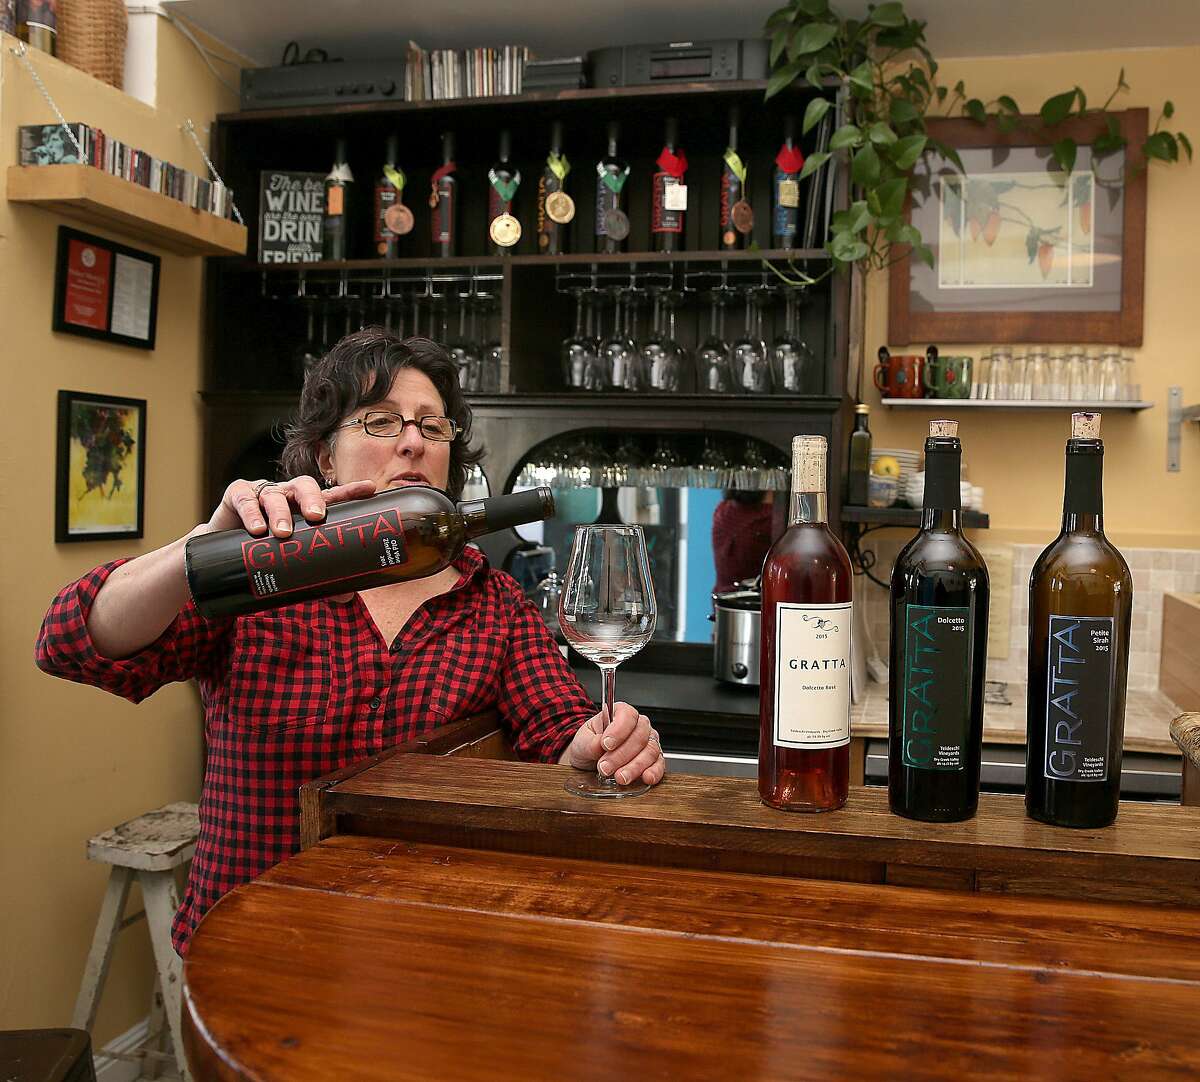 Barbara Gratta of Gratta Wines shows her tasting room at the Butchertown Gourmet Marketplace on Tuesday, March 7, 2017, in San Francisco, Calif.